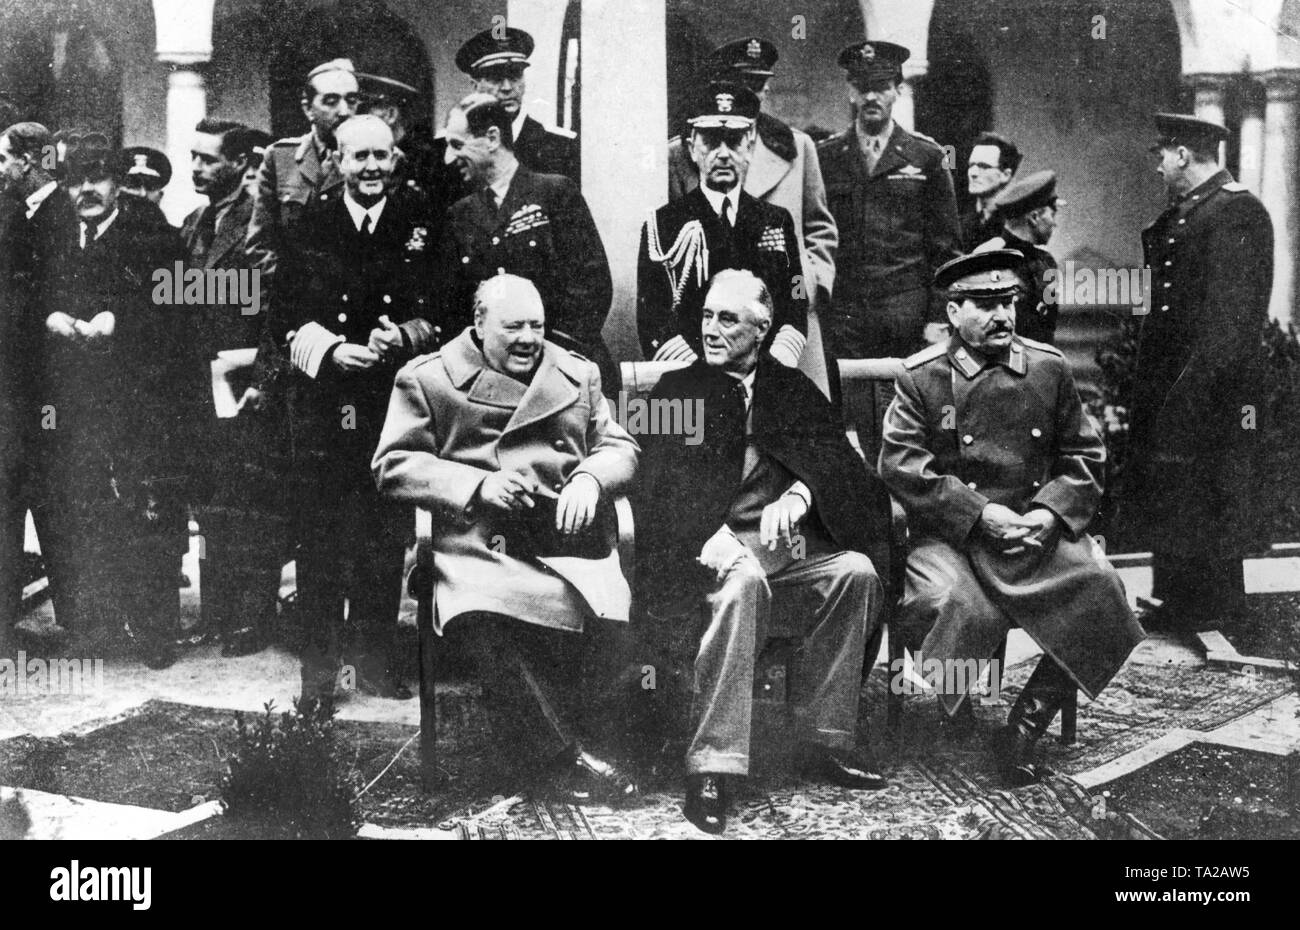 First row L-R: Winston Churchill, Franklin D. Roosevelt, Joseph Stalin, Second row L-R: Anthony Eden, Vyacheslav Molotov, Sir Alan Cunningham, also shown: General Sir Hastings Ismay, Fleet Admiral E.J. King, Yalta Conference, 4th-11th February 1945, Konferenz von Jalta: Winston Churchill, Franklin D. Roosevelt, Josef Stalin, 1945, Stock Photo